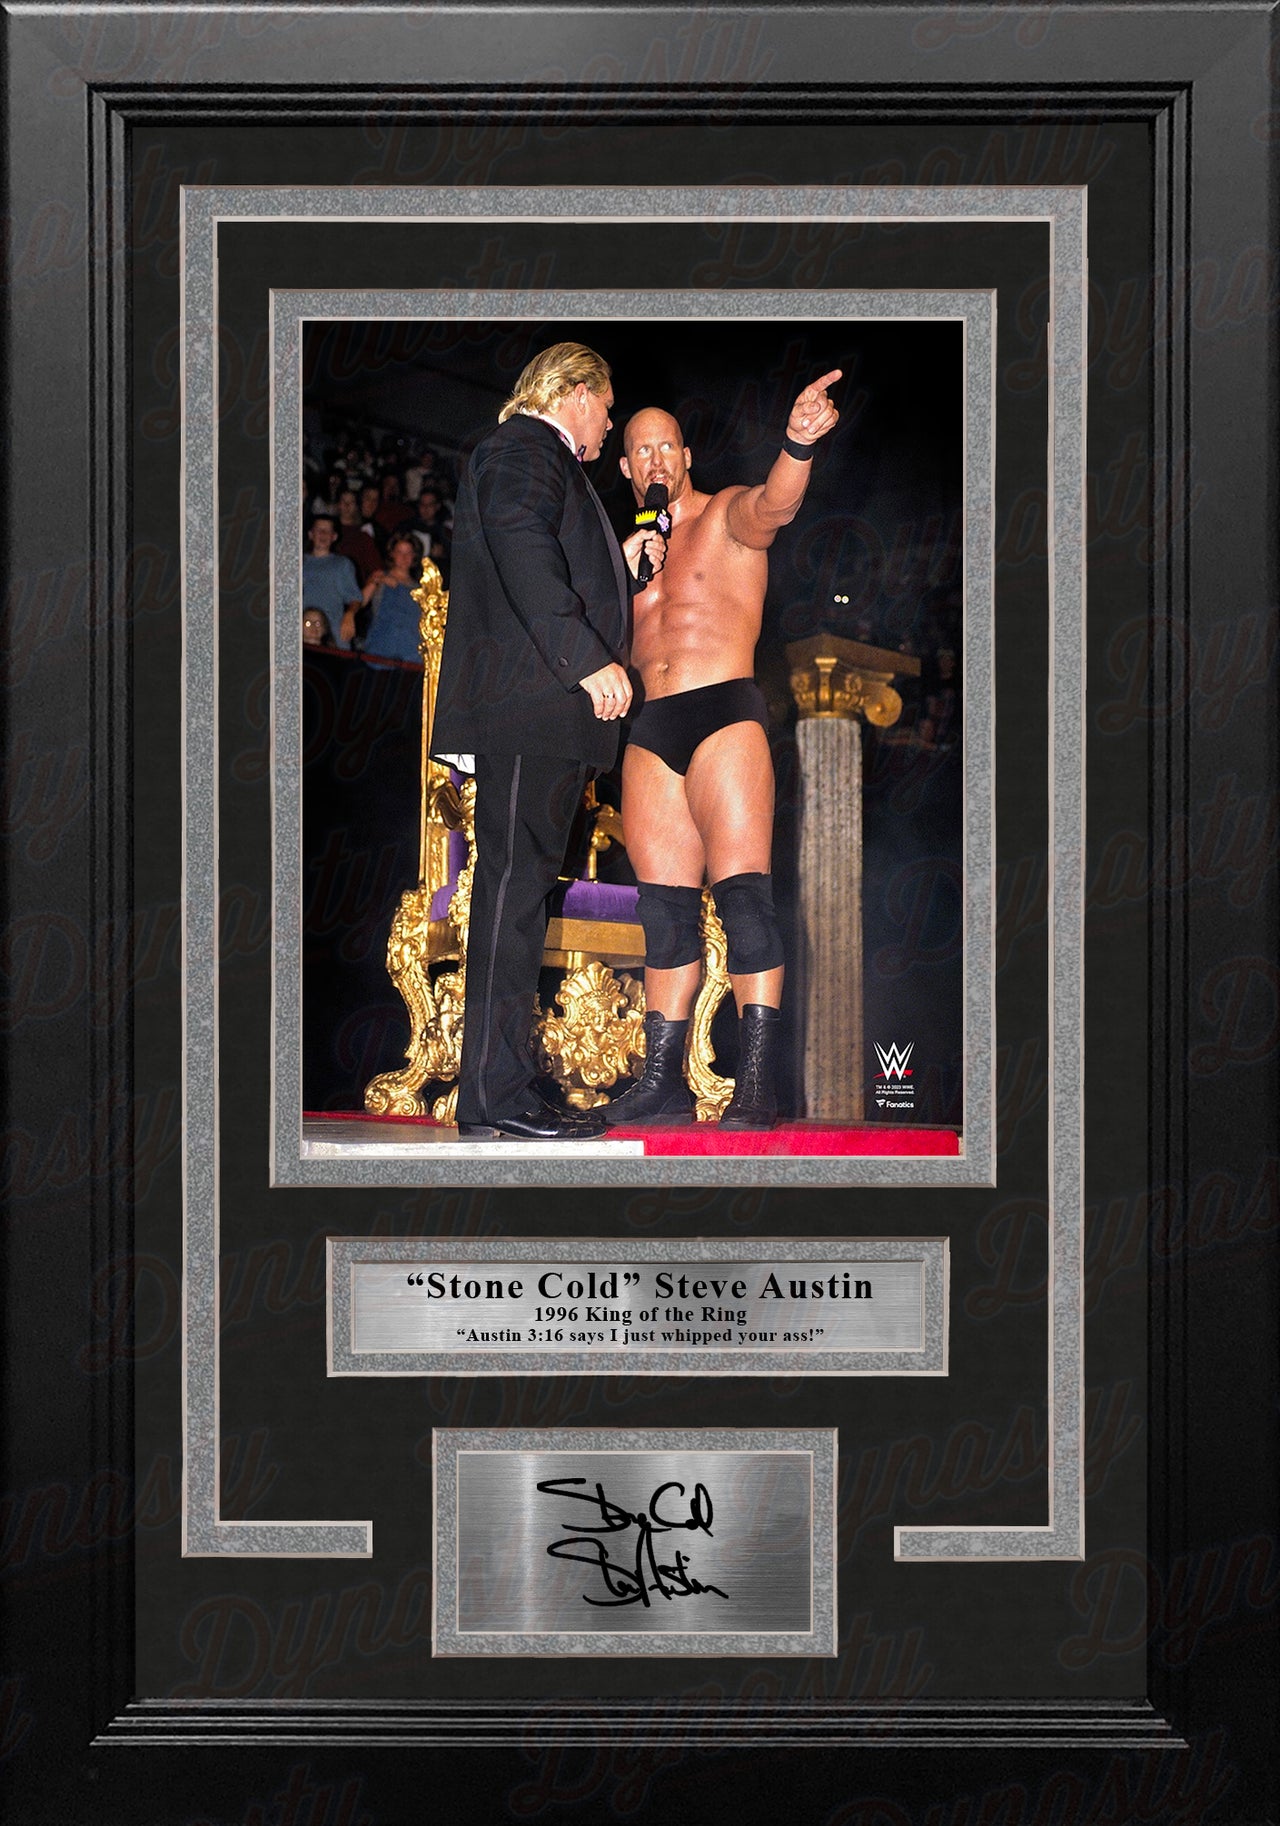 Stone Cold Steve Austin King of the Ring Austin 3:16 Speech 8x10 Framed Photo w/ Engraved Autograph - Dynasty Sports & Framing 